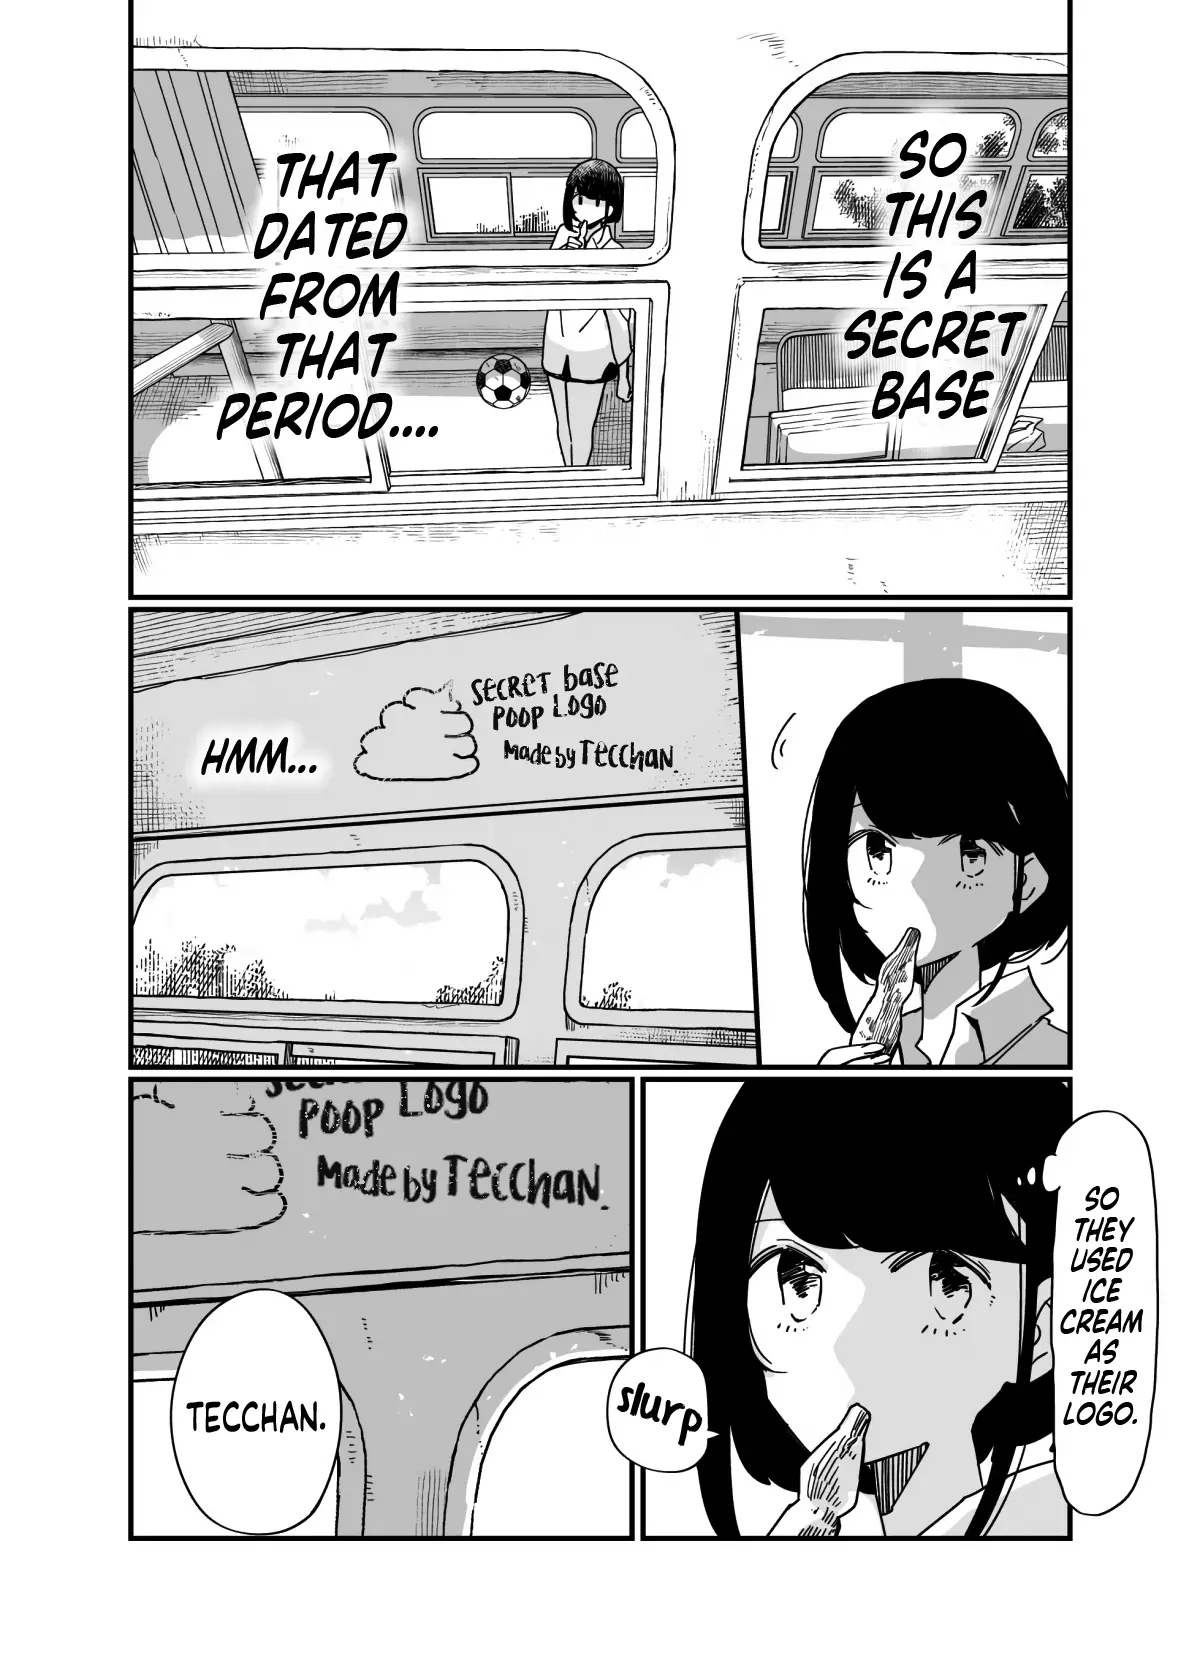 Living In An Abandoned Bus - 2 page 8-e043ca85